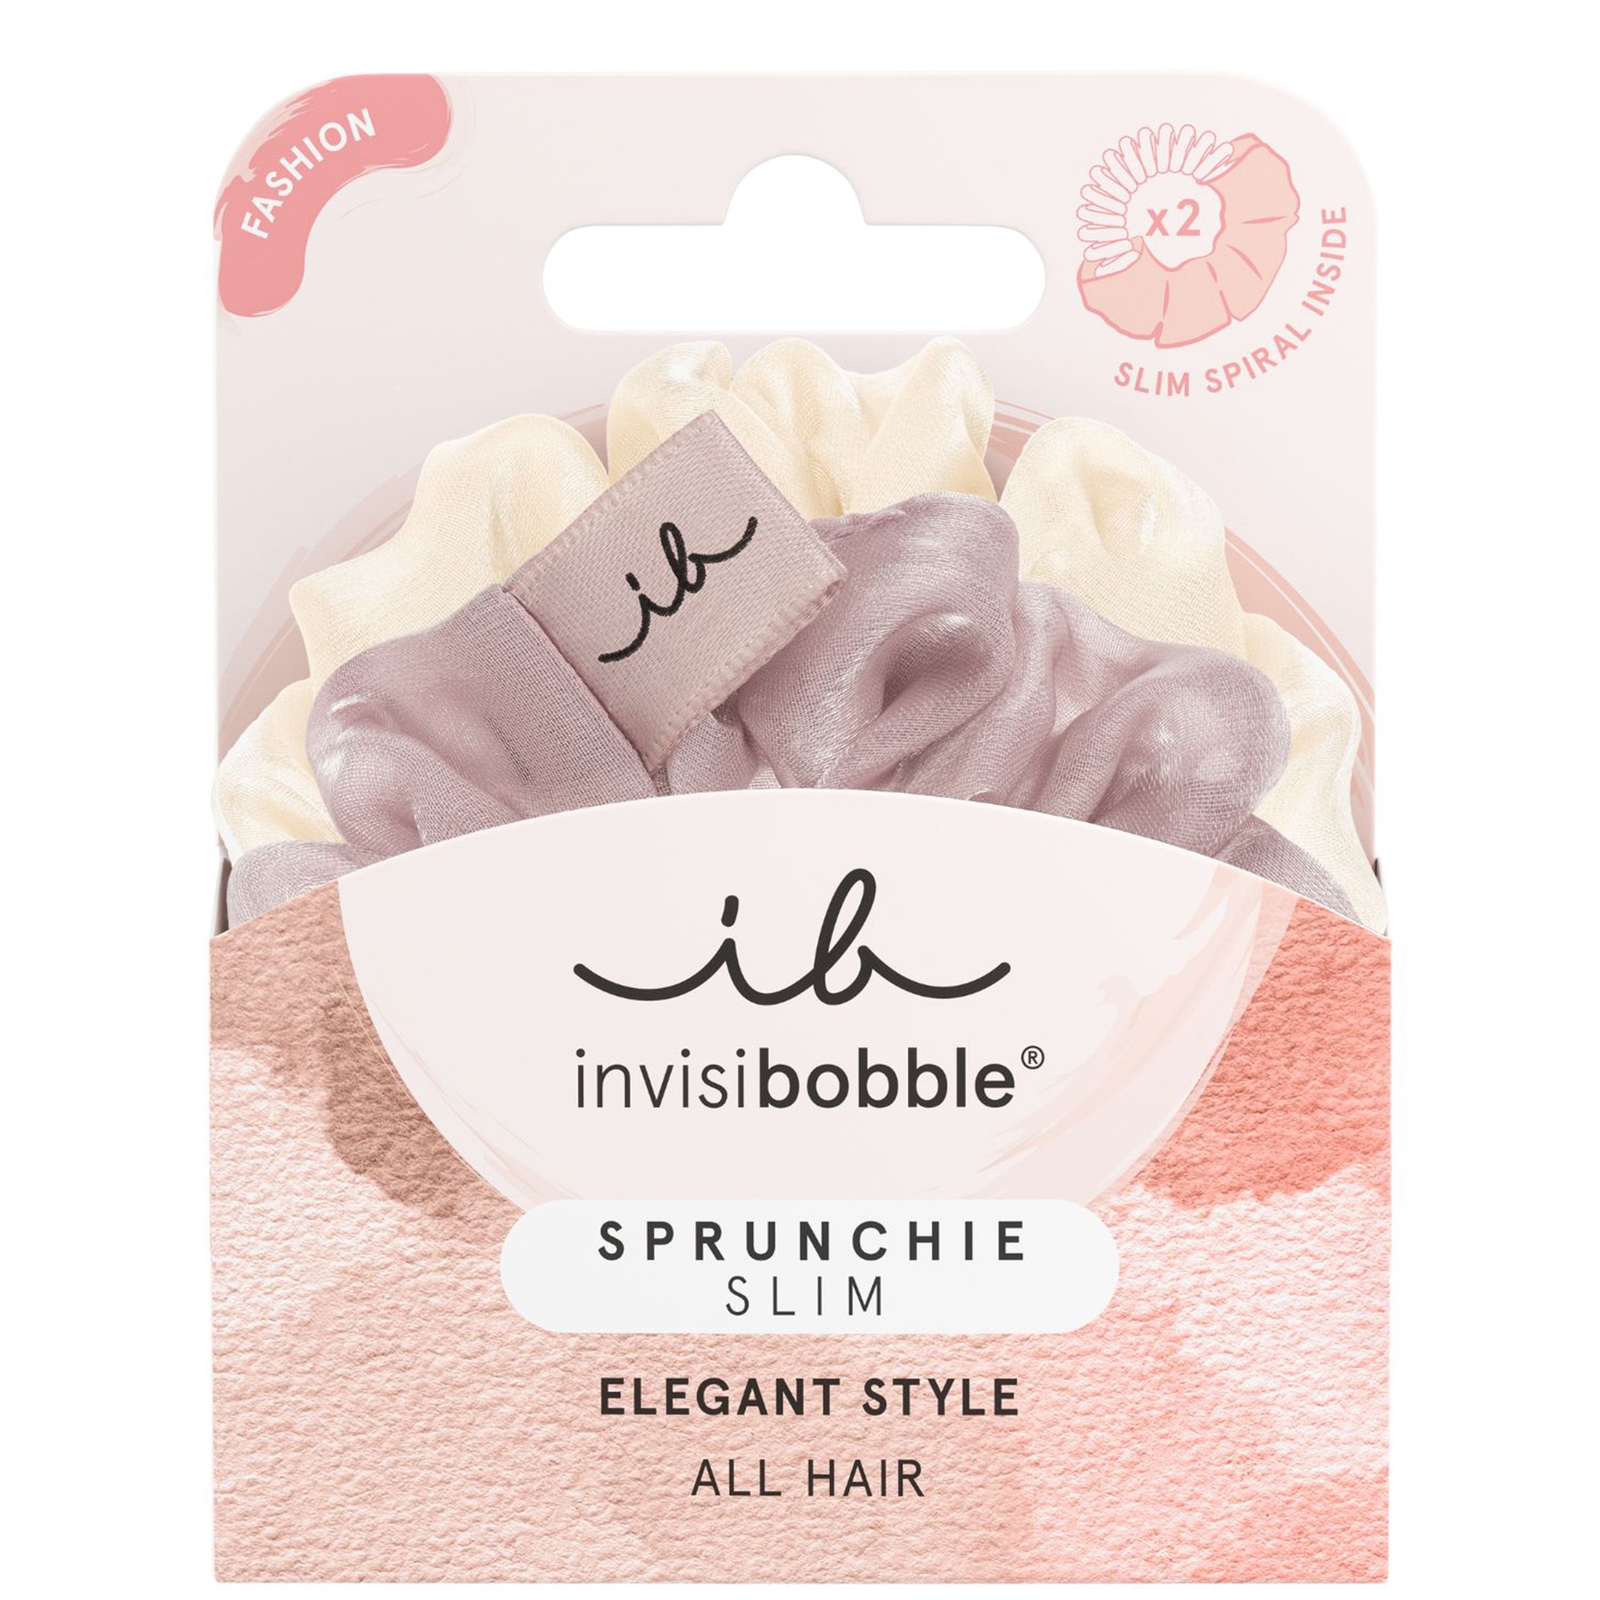 Image of invisibobble SPRUNCHIE SLIM Hairiffic Pack of 2